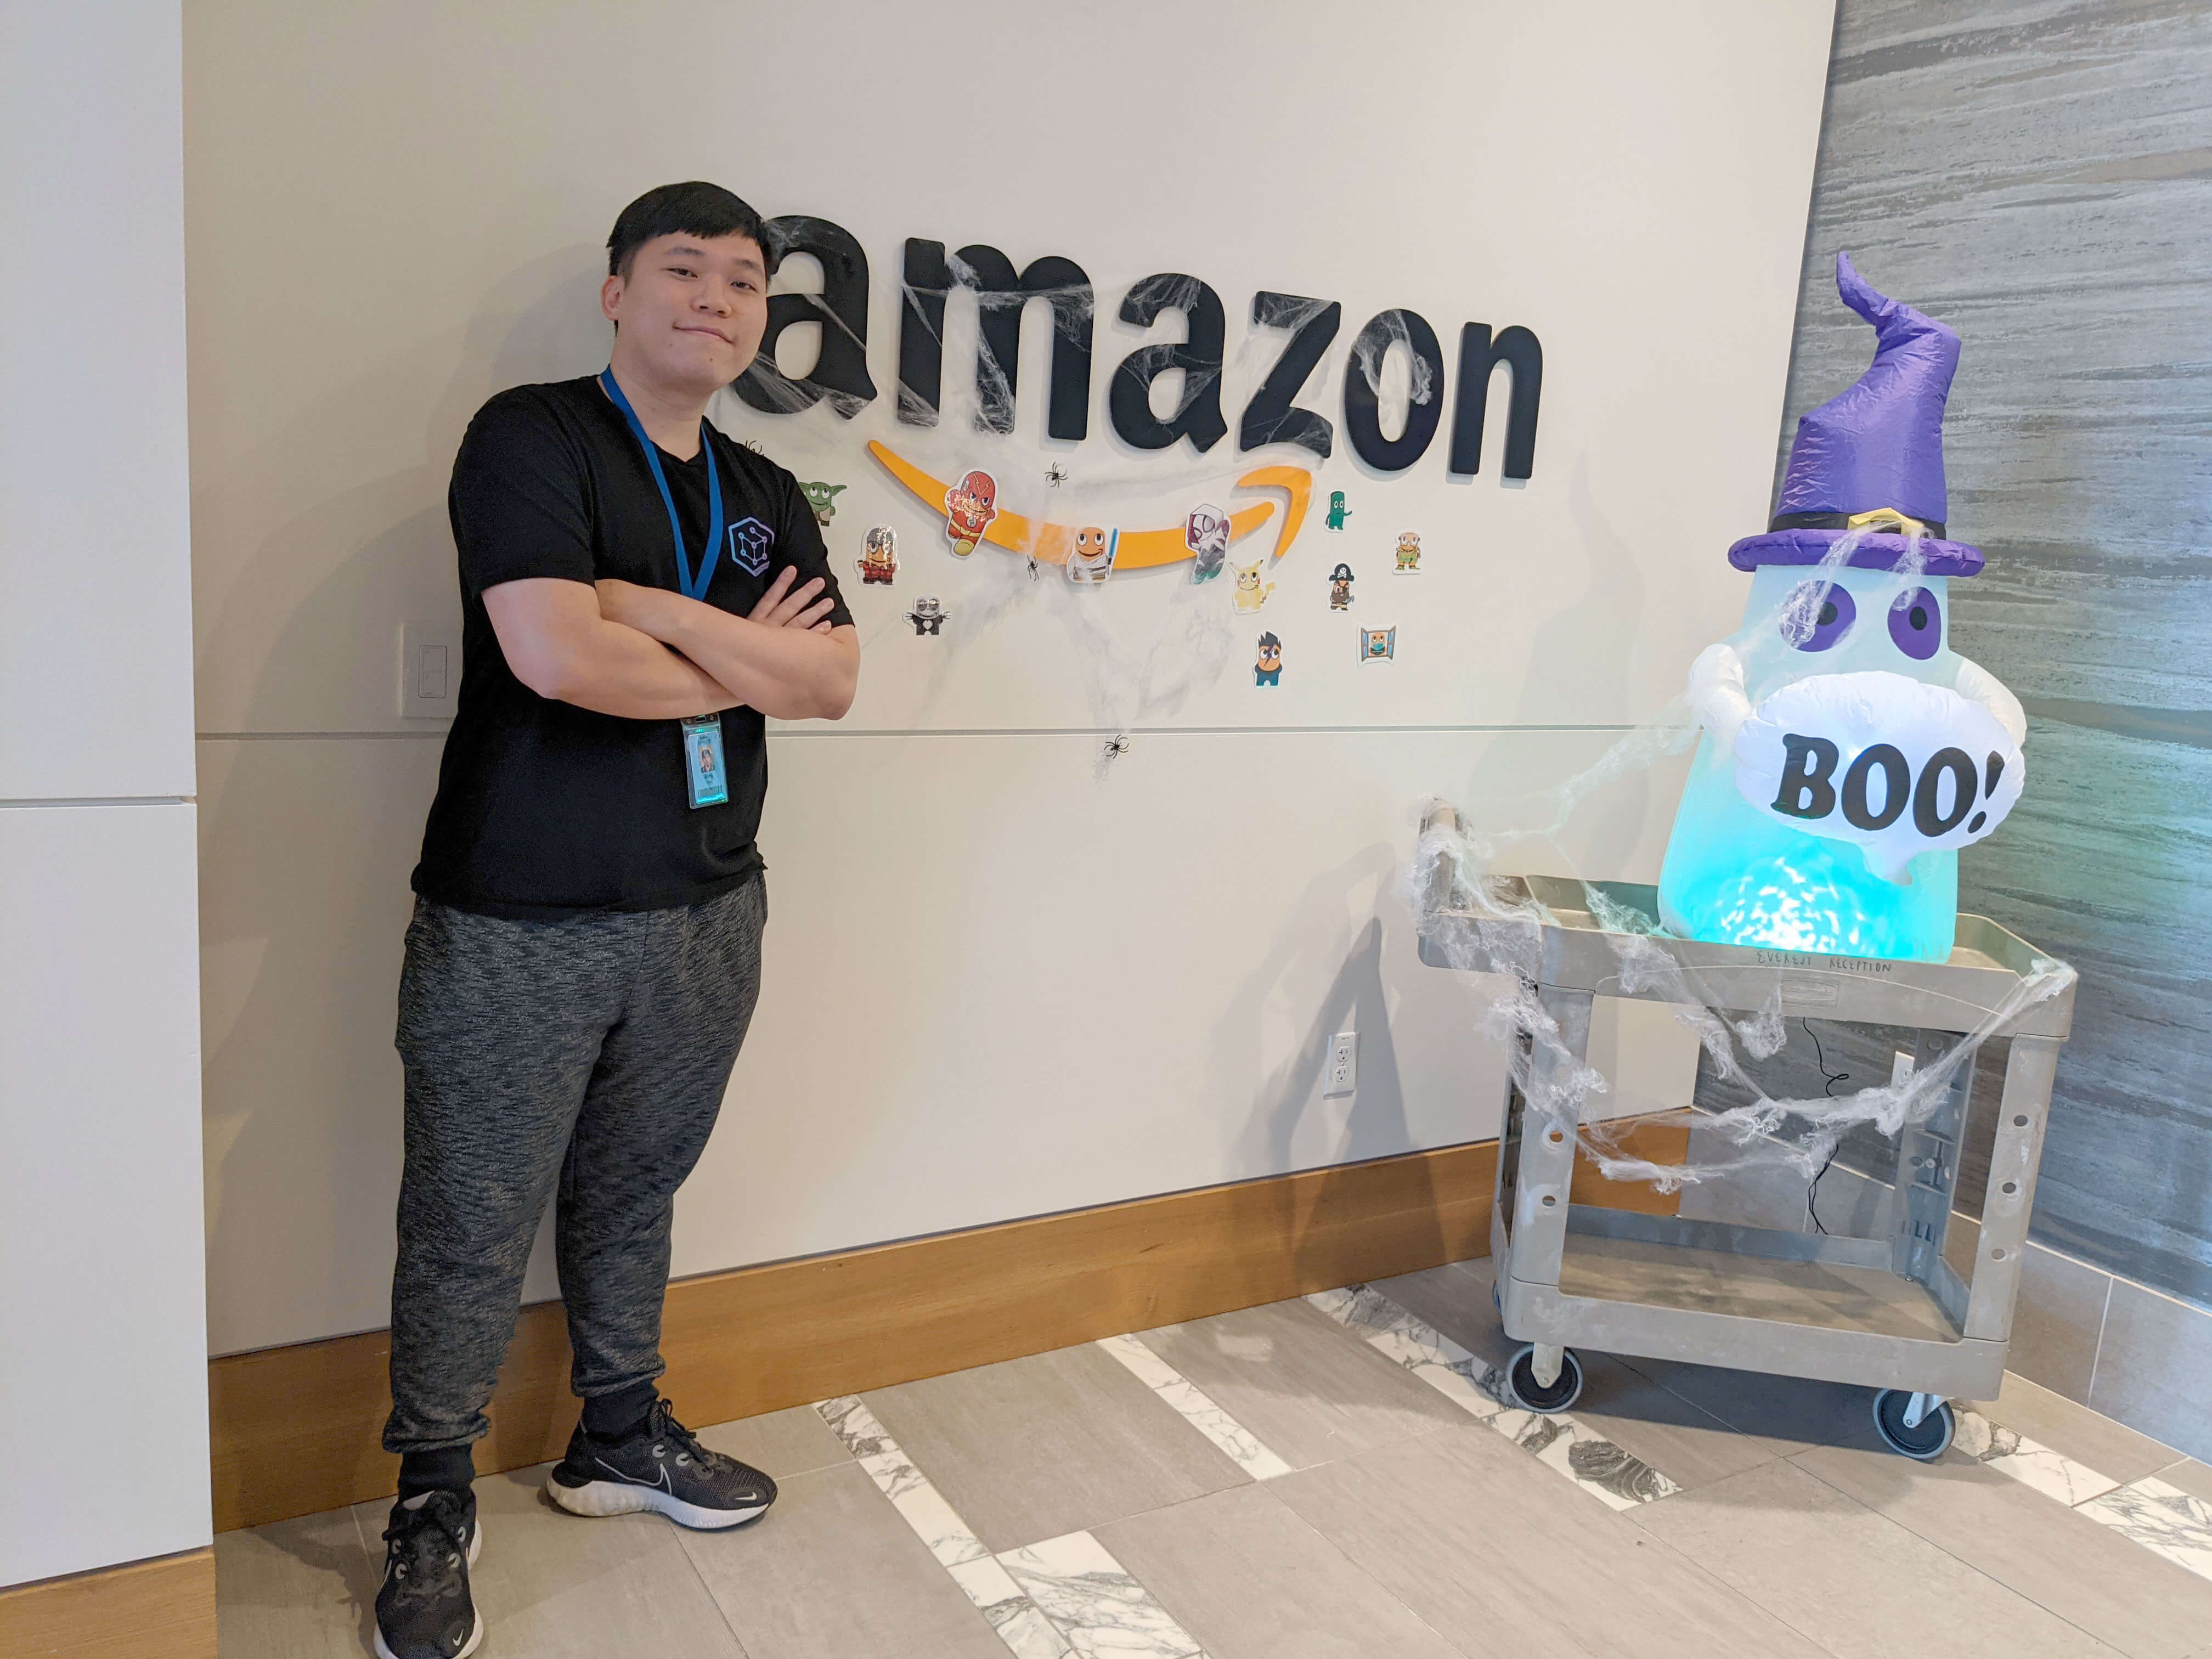 DigiPen alumni Thin Bing Zong stands next to Amazon corporate logo sign